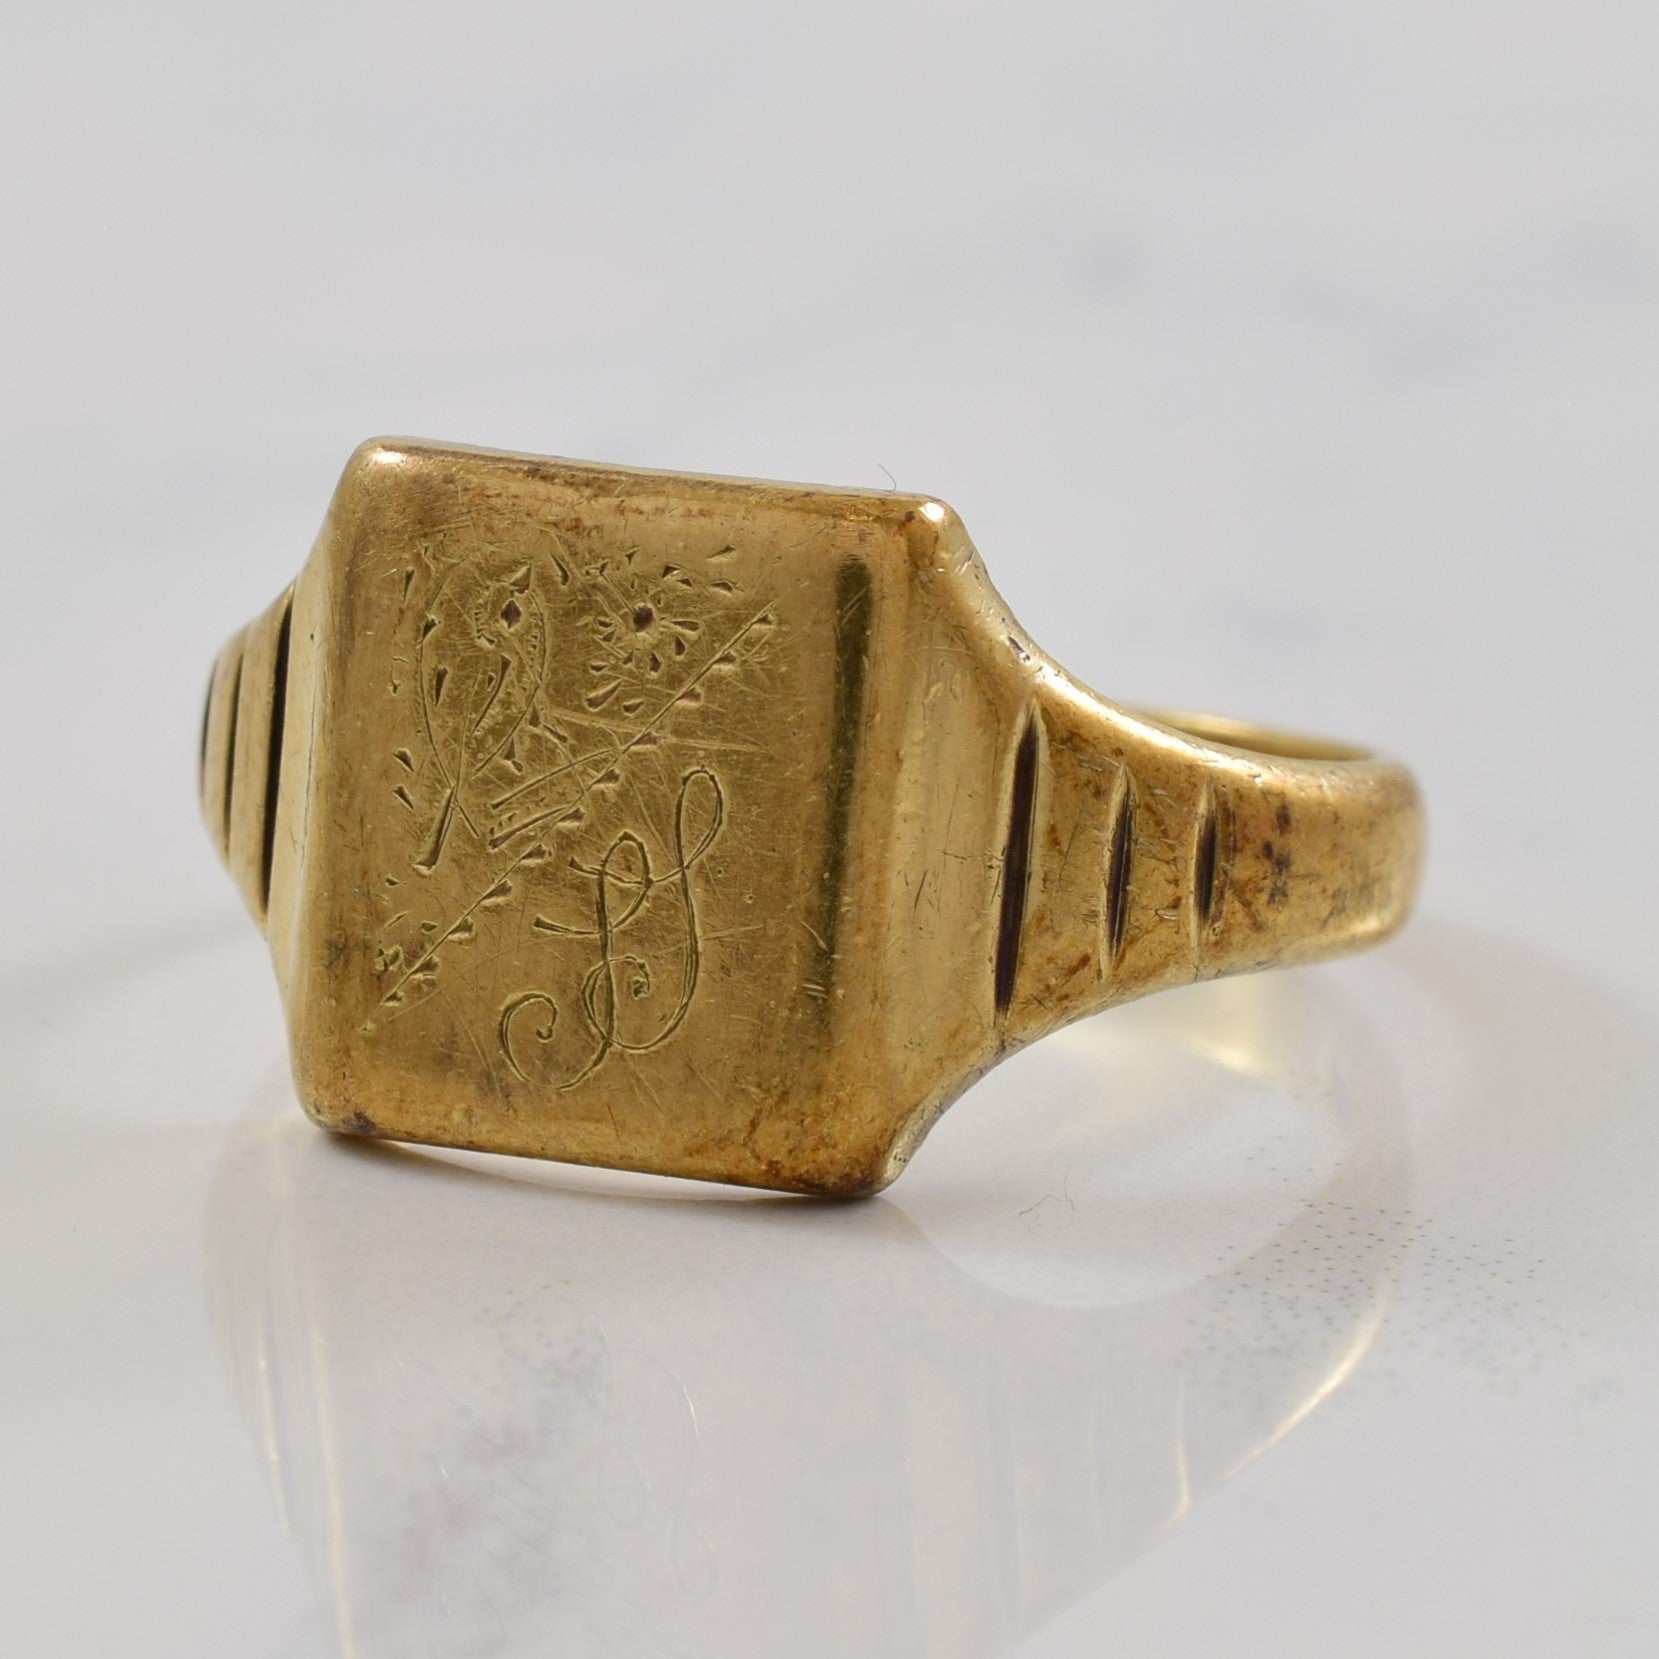 1960s Engraved Intials 'SS' Signet Ring | SZ 10.75 |